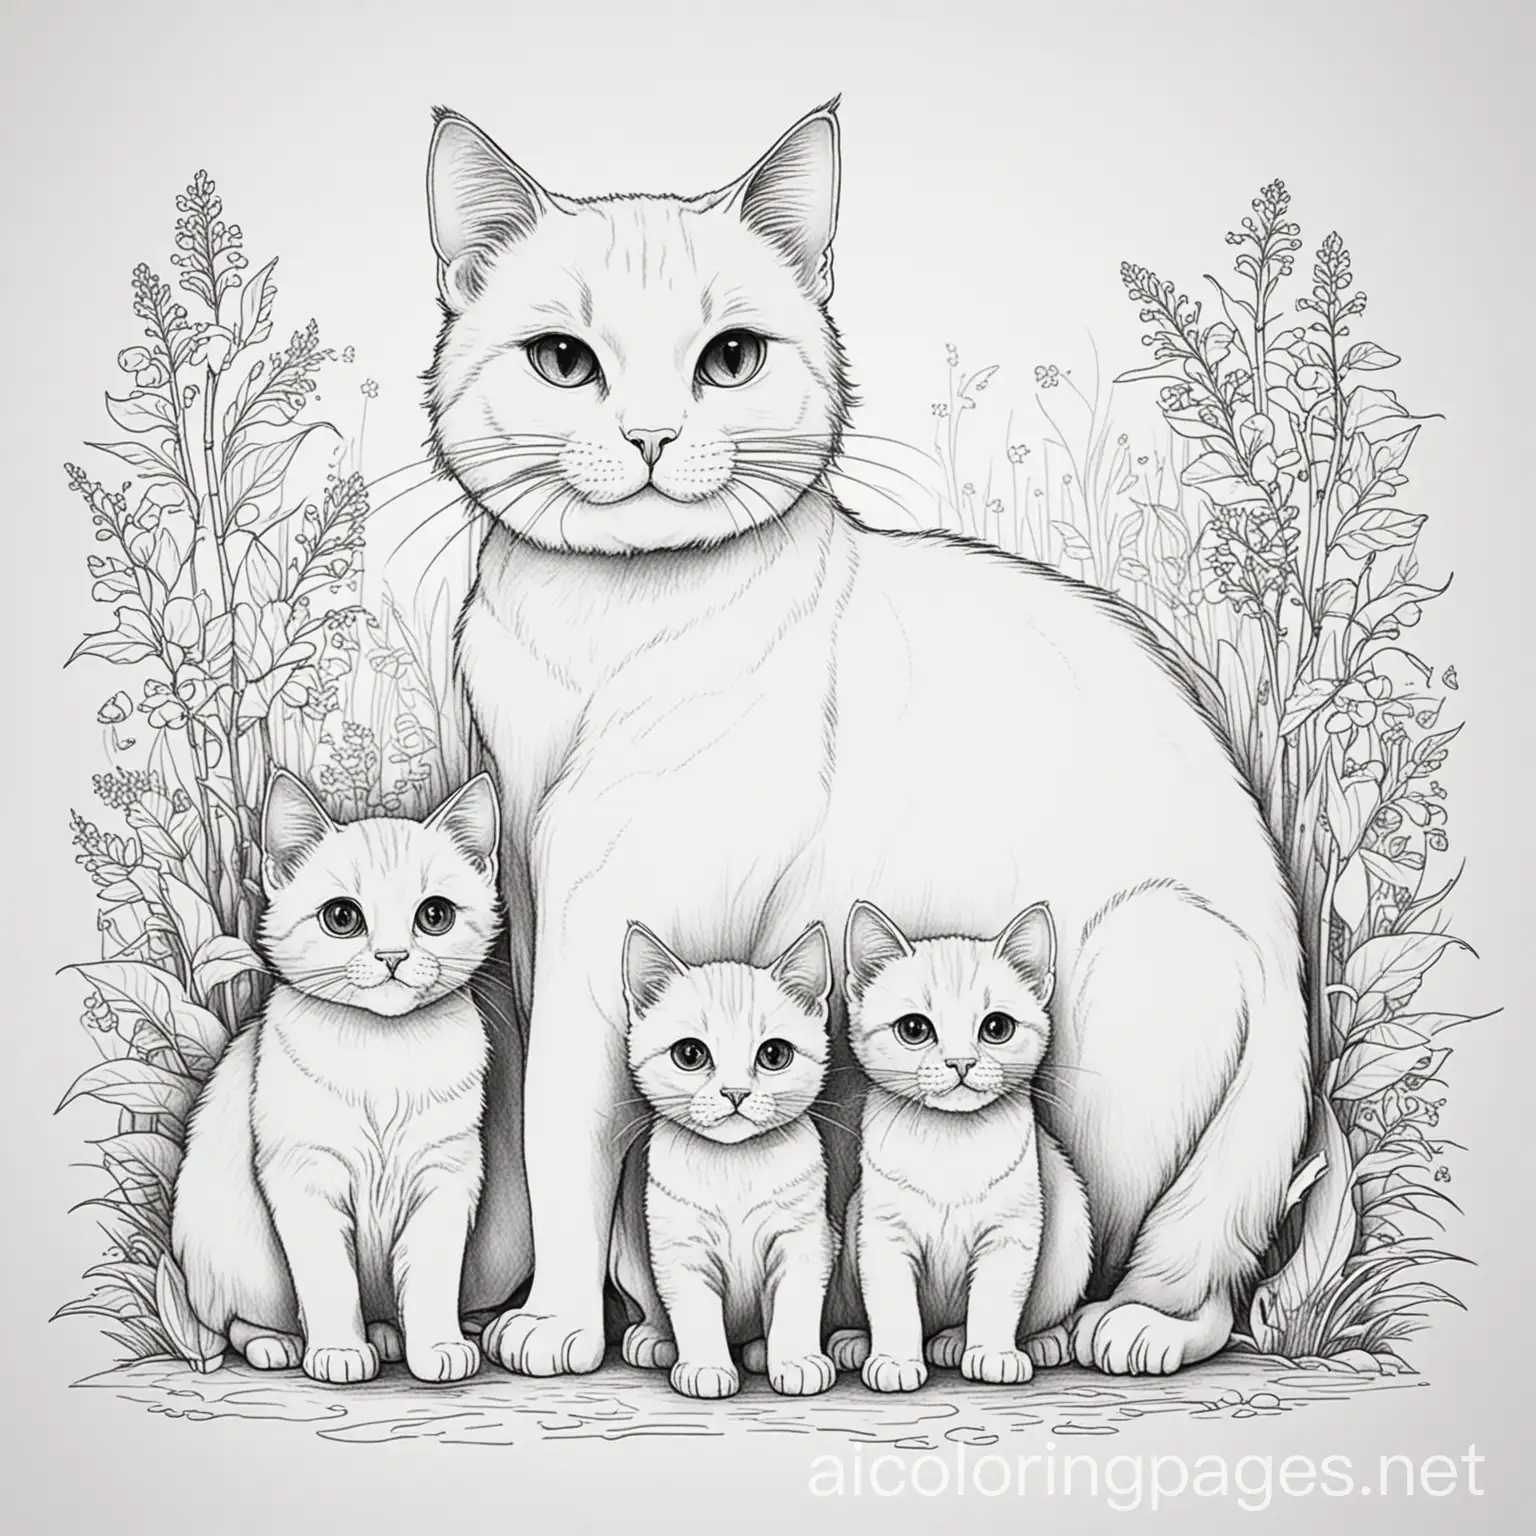 Mother-Cat-and-Kittens-Coloring-Page-Line-Art-on-White-Background